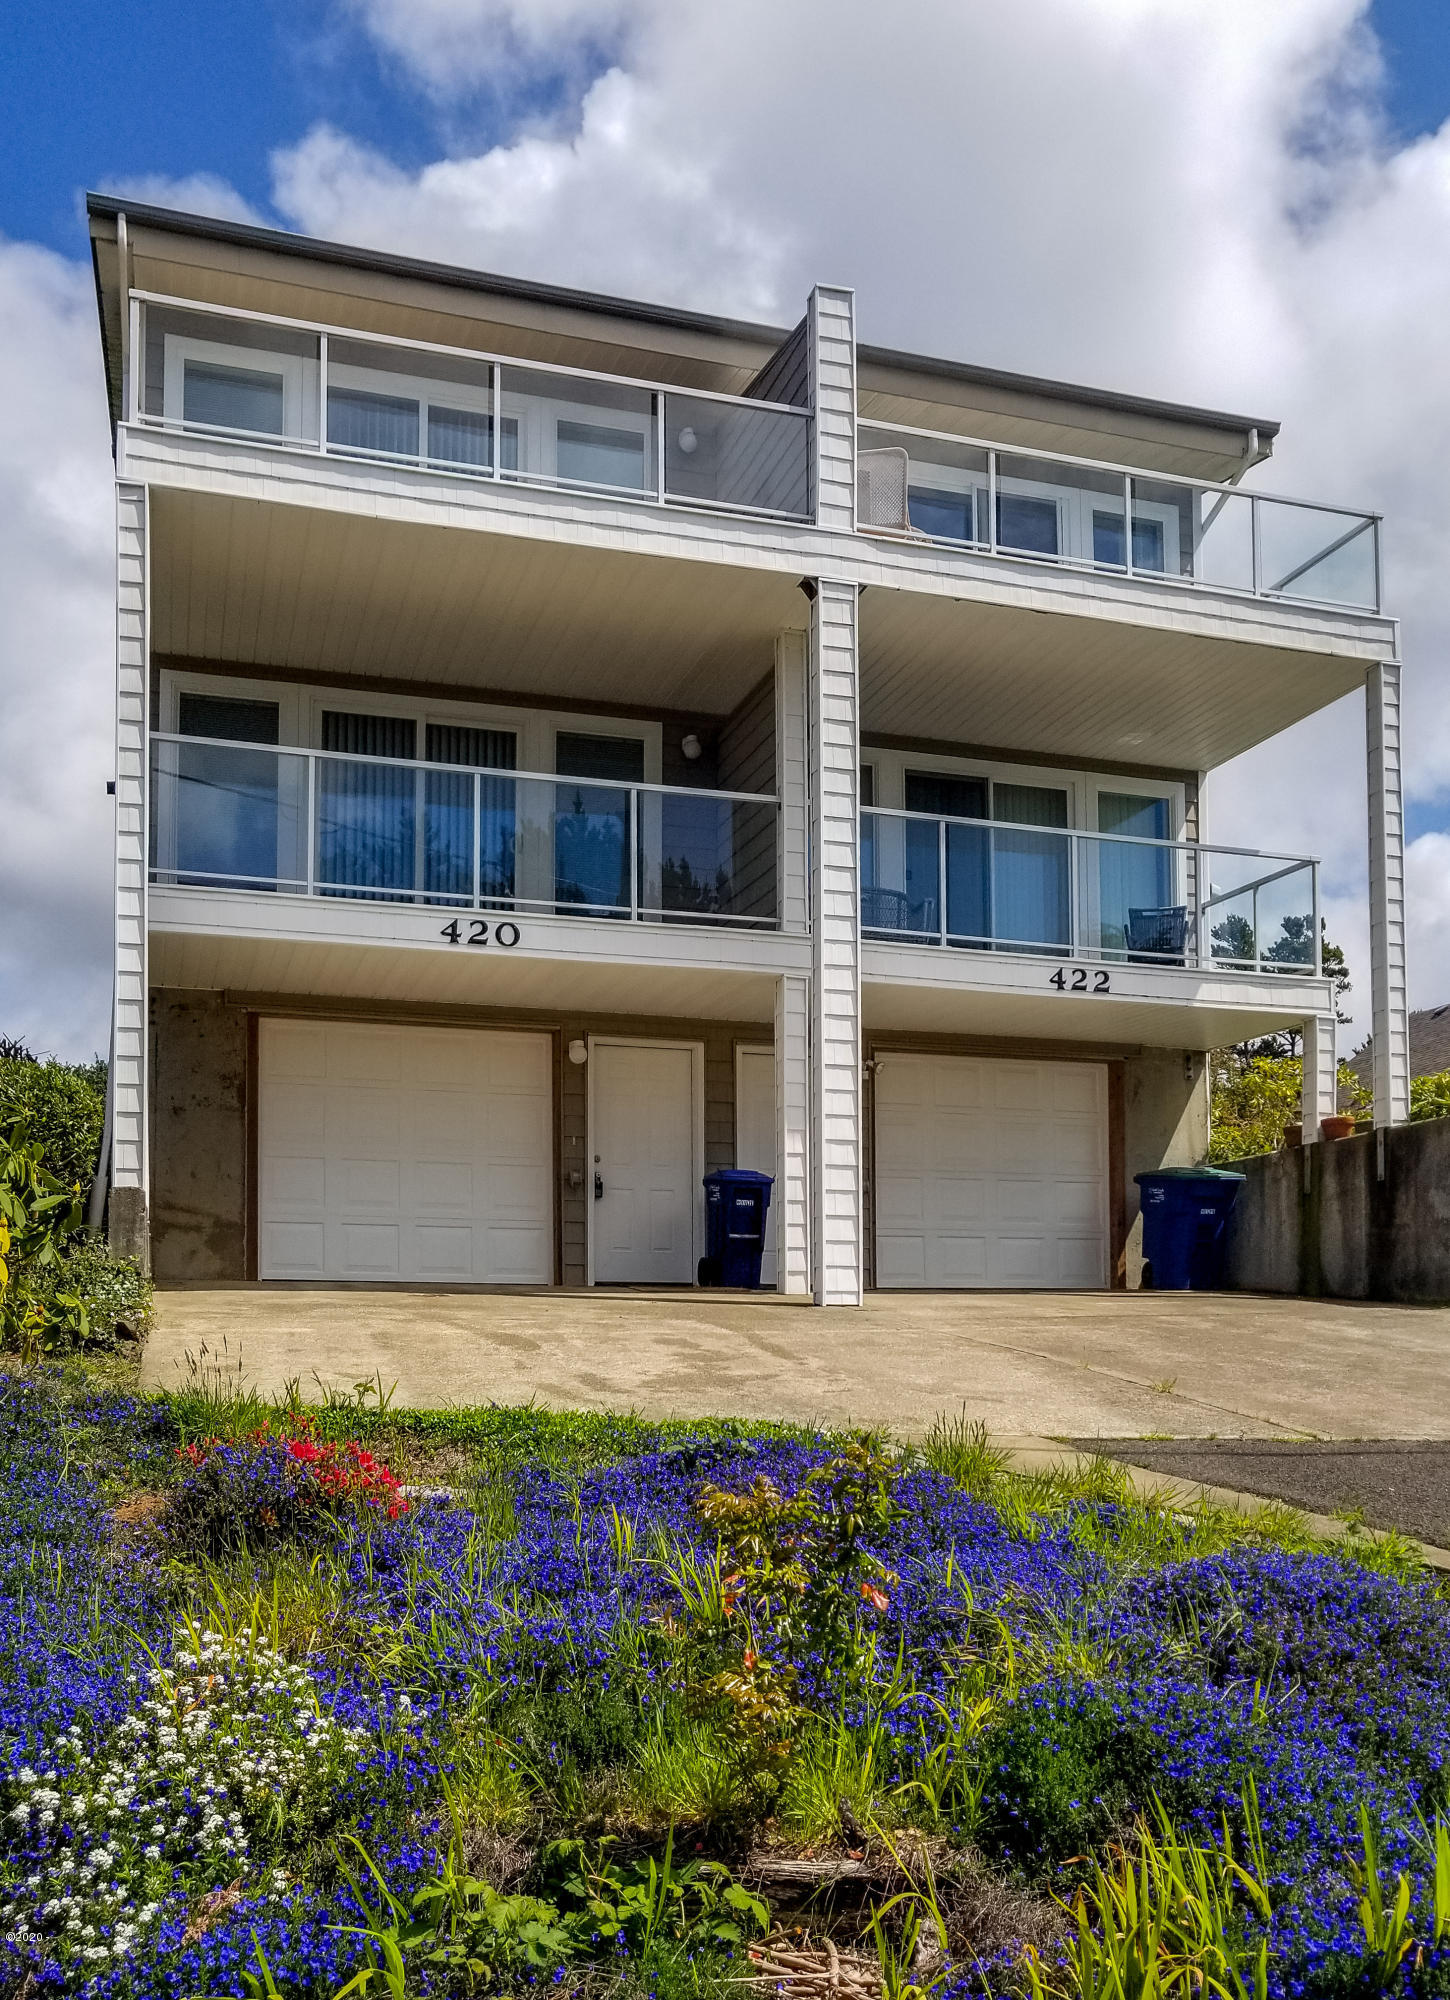 420 SW Coast Ave Depoe Bay, Gleneden Beach, Lincoln City, Newport, Otis, Rose Lodge, Seal Rock, Waldport, Yachats, To Home Listings - Amy Plechaty, Emerald Coast Realty Real Estate, homes for sale, property for sale